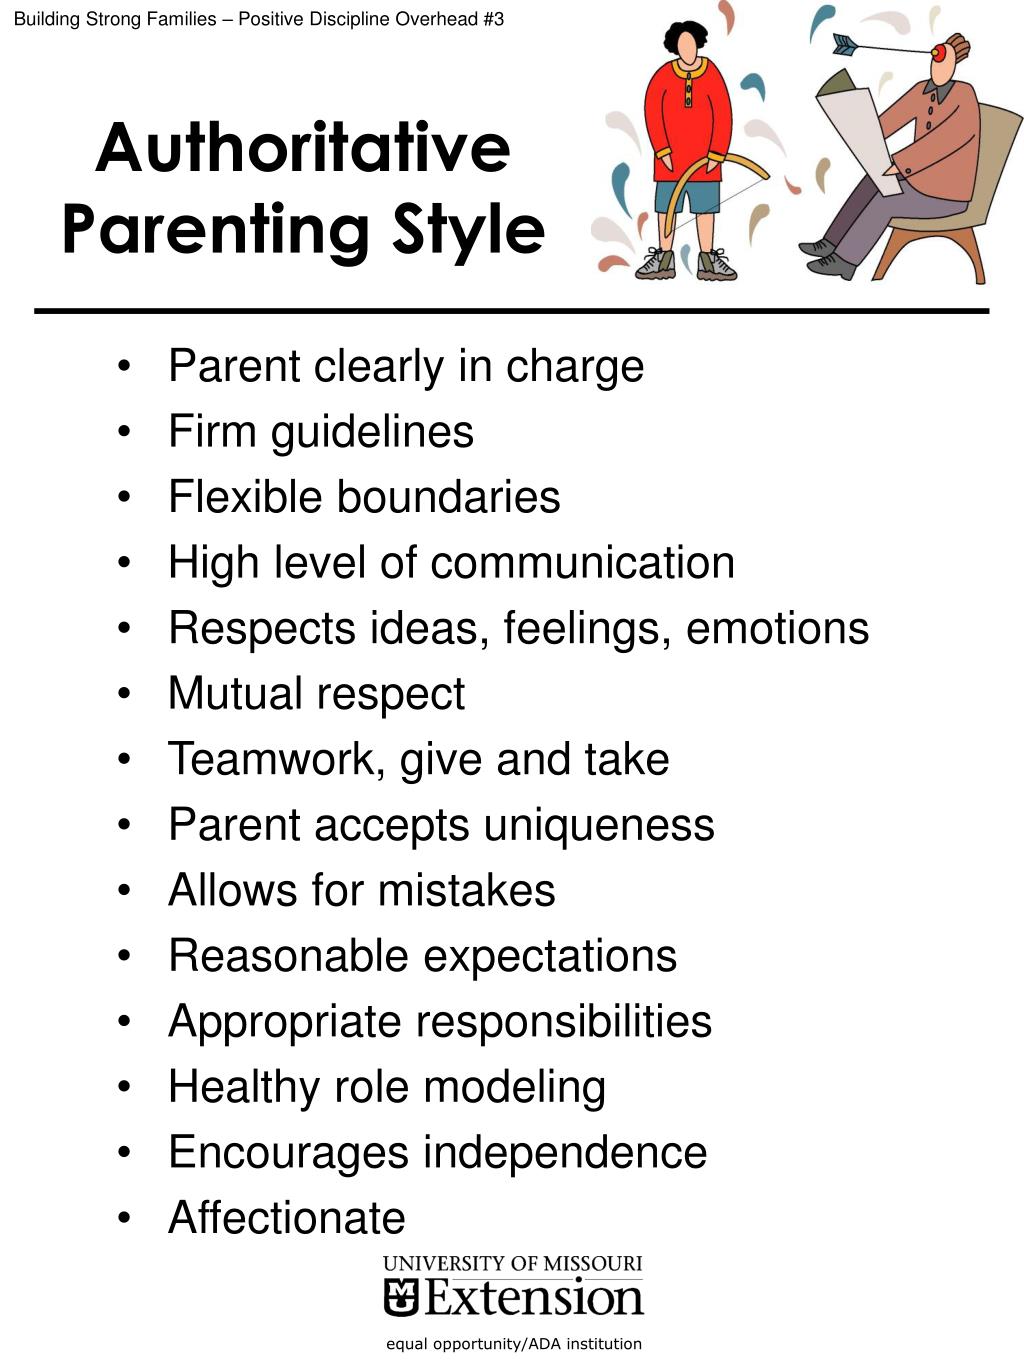 research on authoritative parenting style